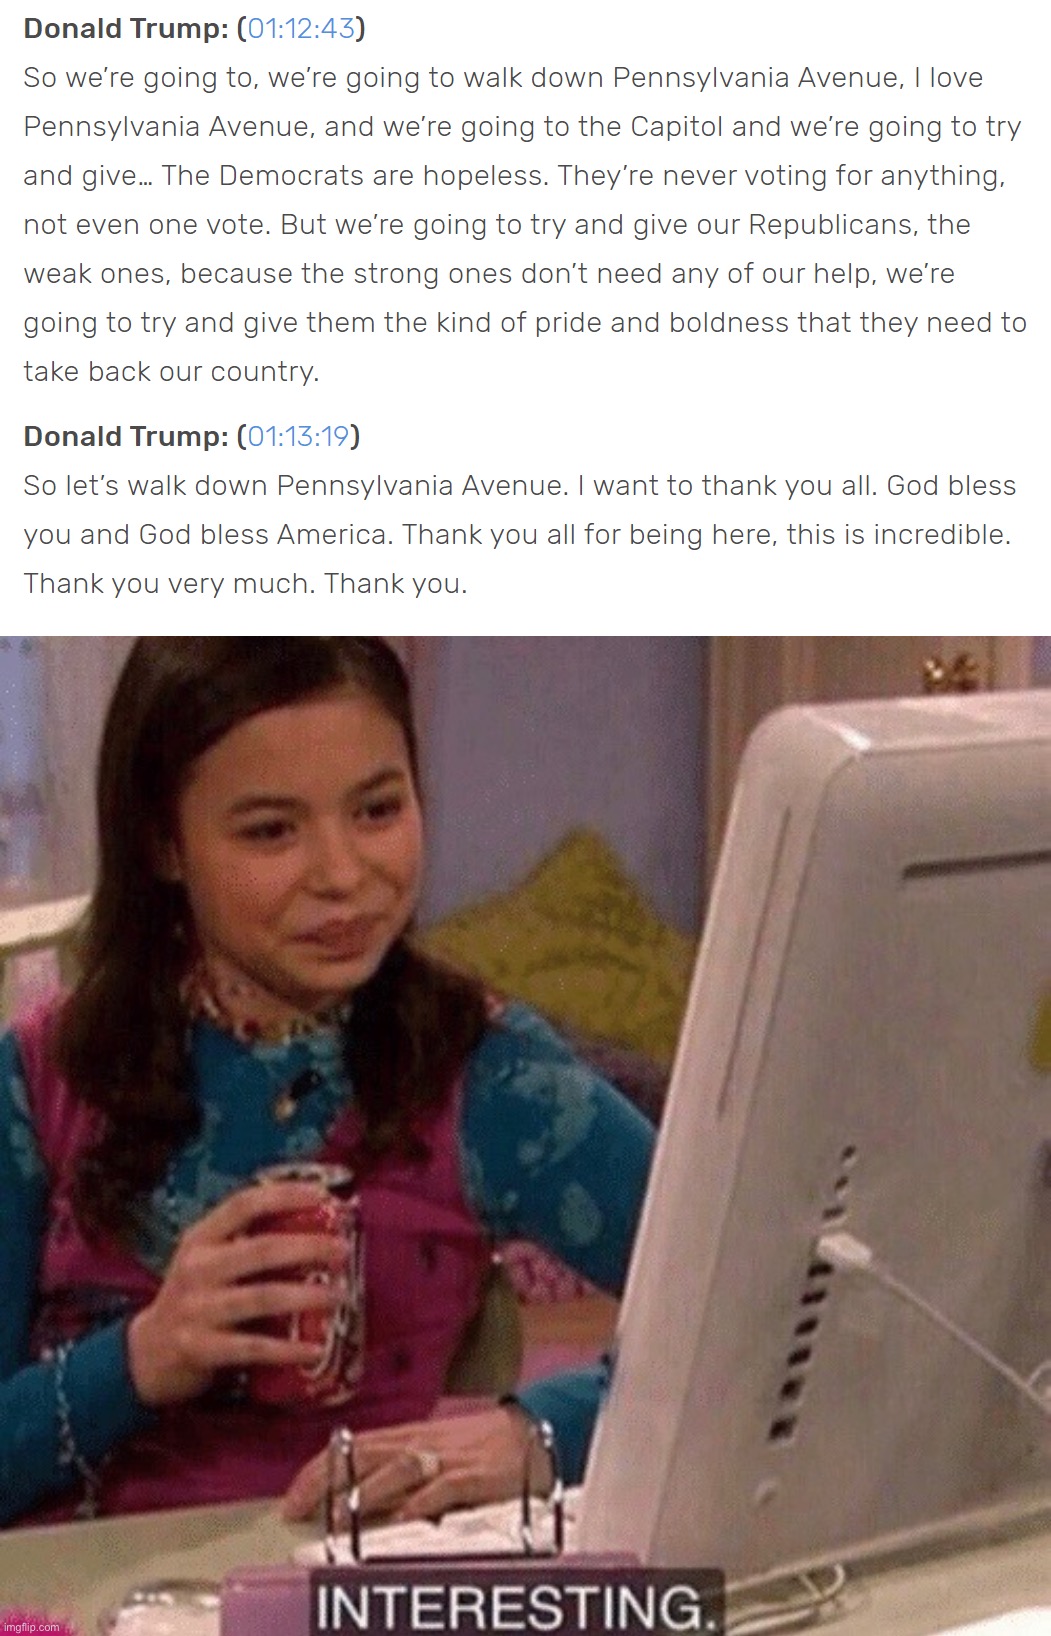 Re-cringe at the ending of the most treasonous speech by an American president in history. | image tagged in trump speech jan 6,icarly interesting | made w/ Imgflip meme maker